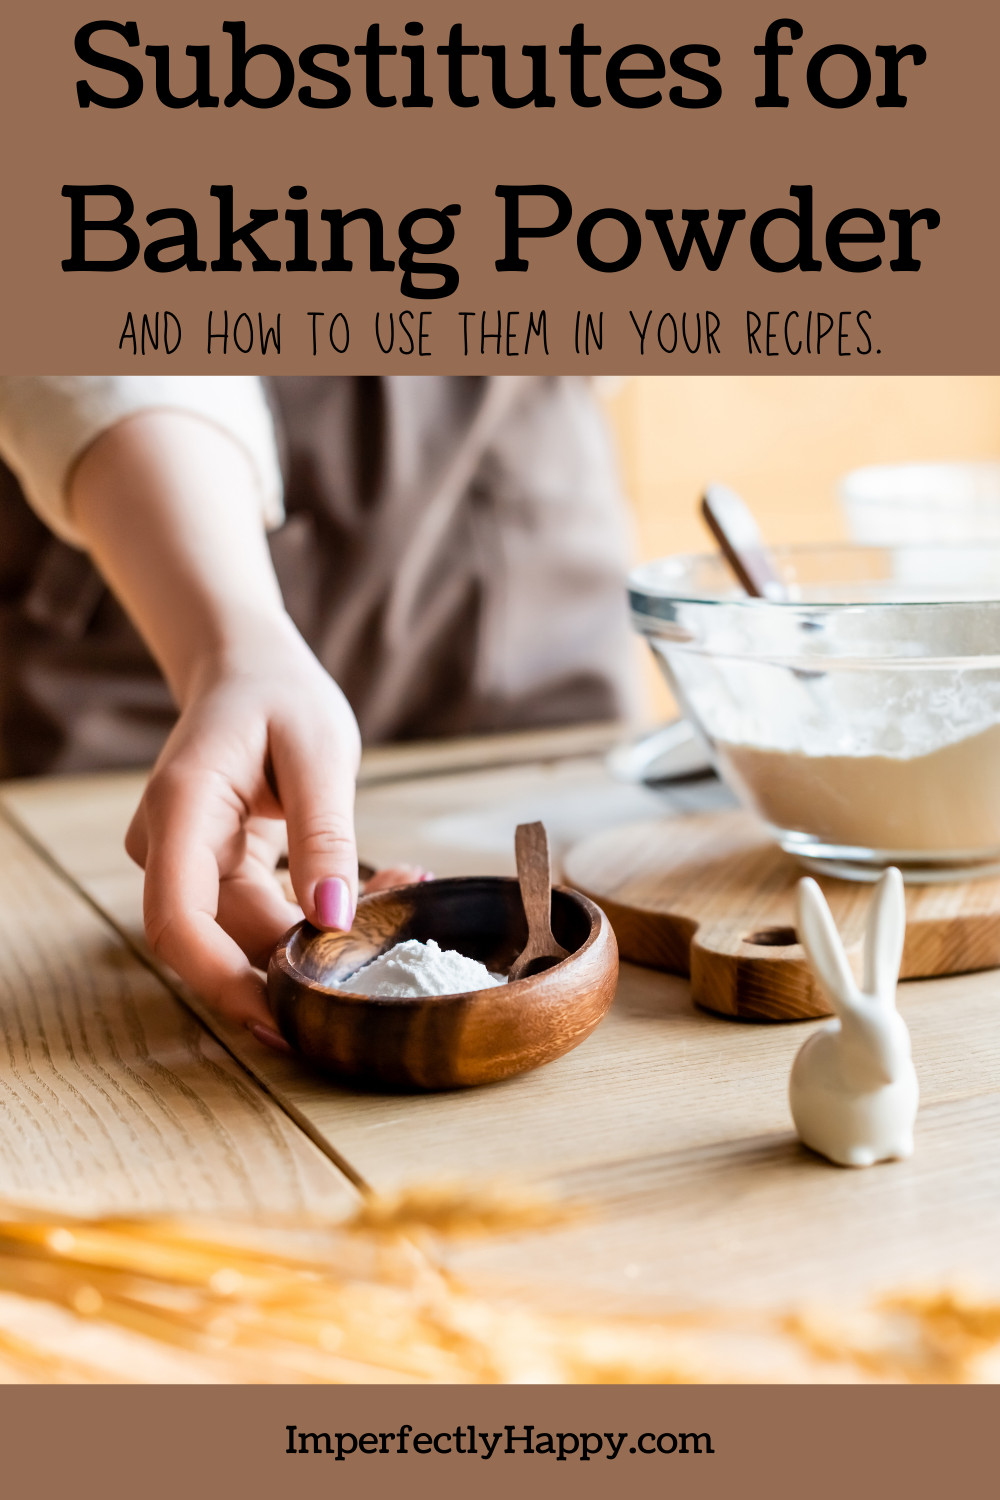 Baking Powder Substitutes and How to Use them in your recipes.